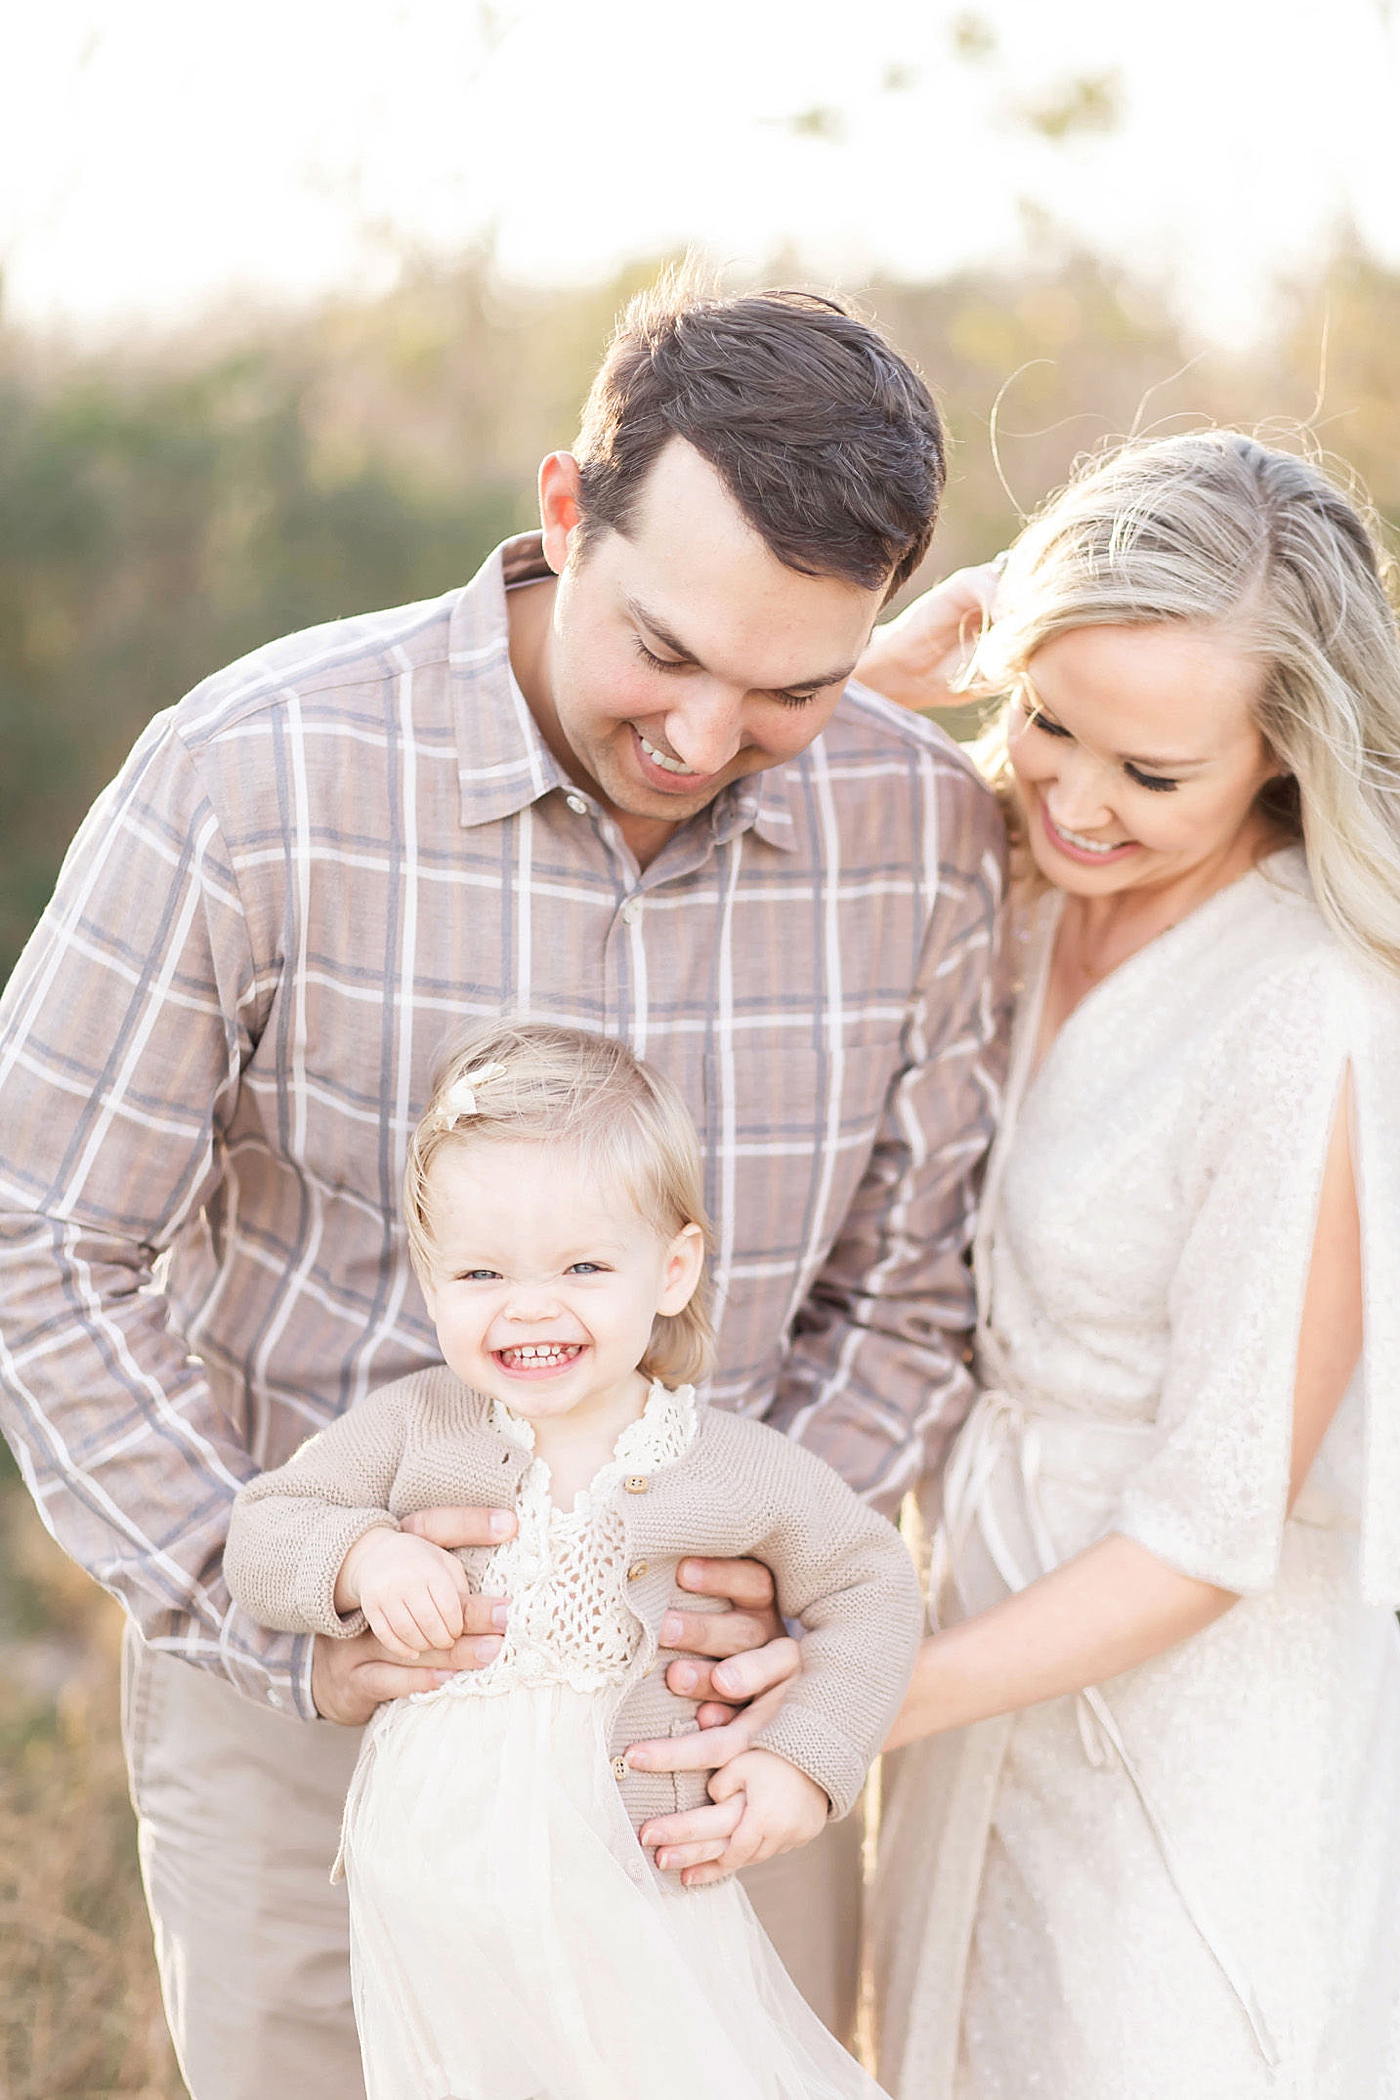 Mom, Dad and toddler daughter. Photo by Fresh Light Photography.